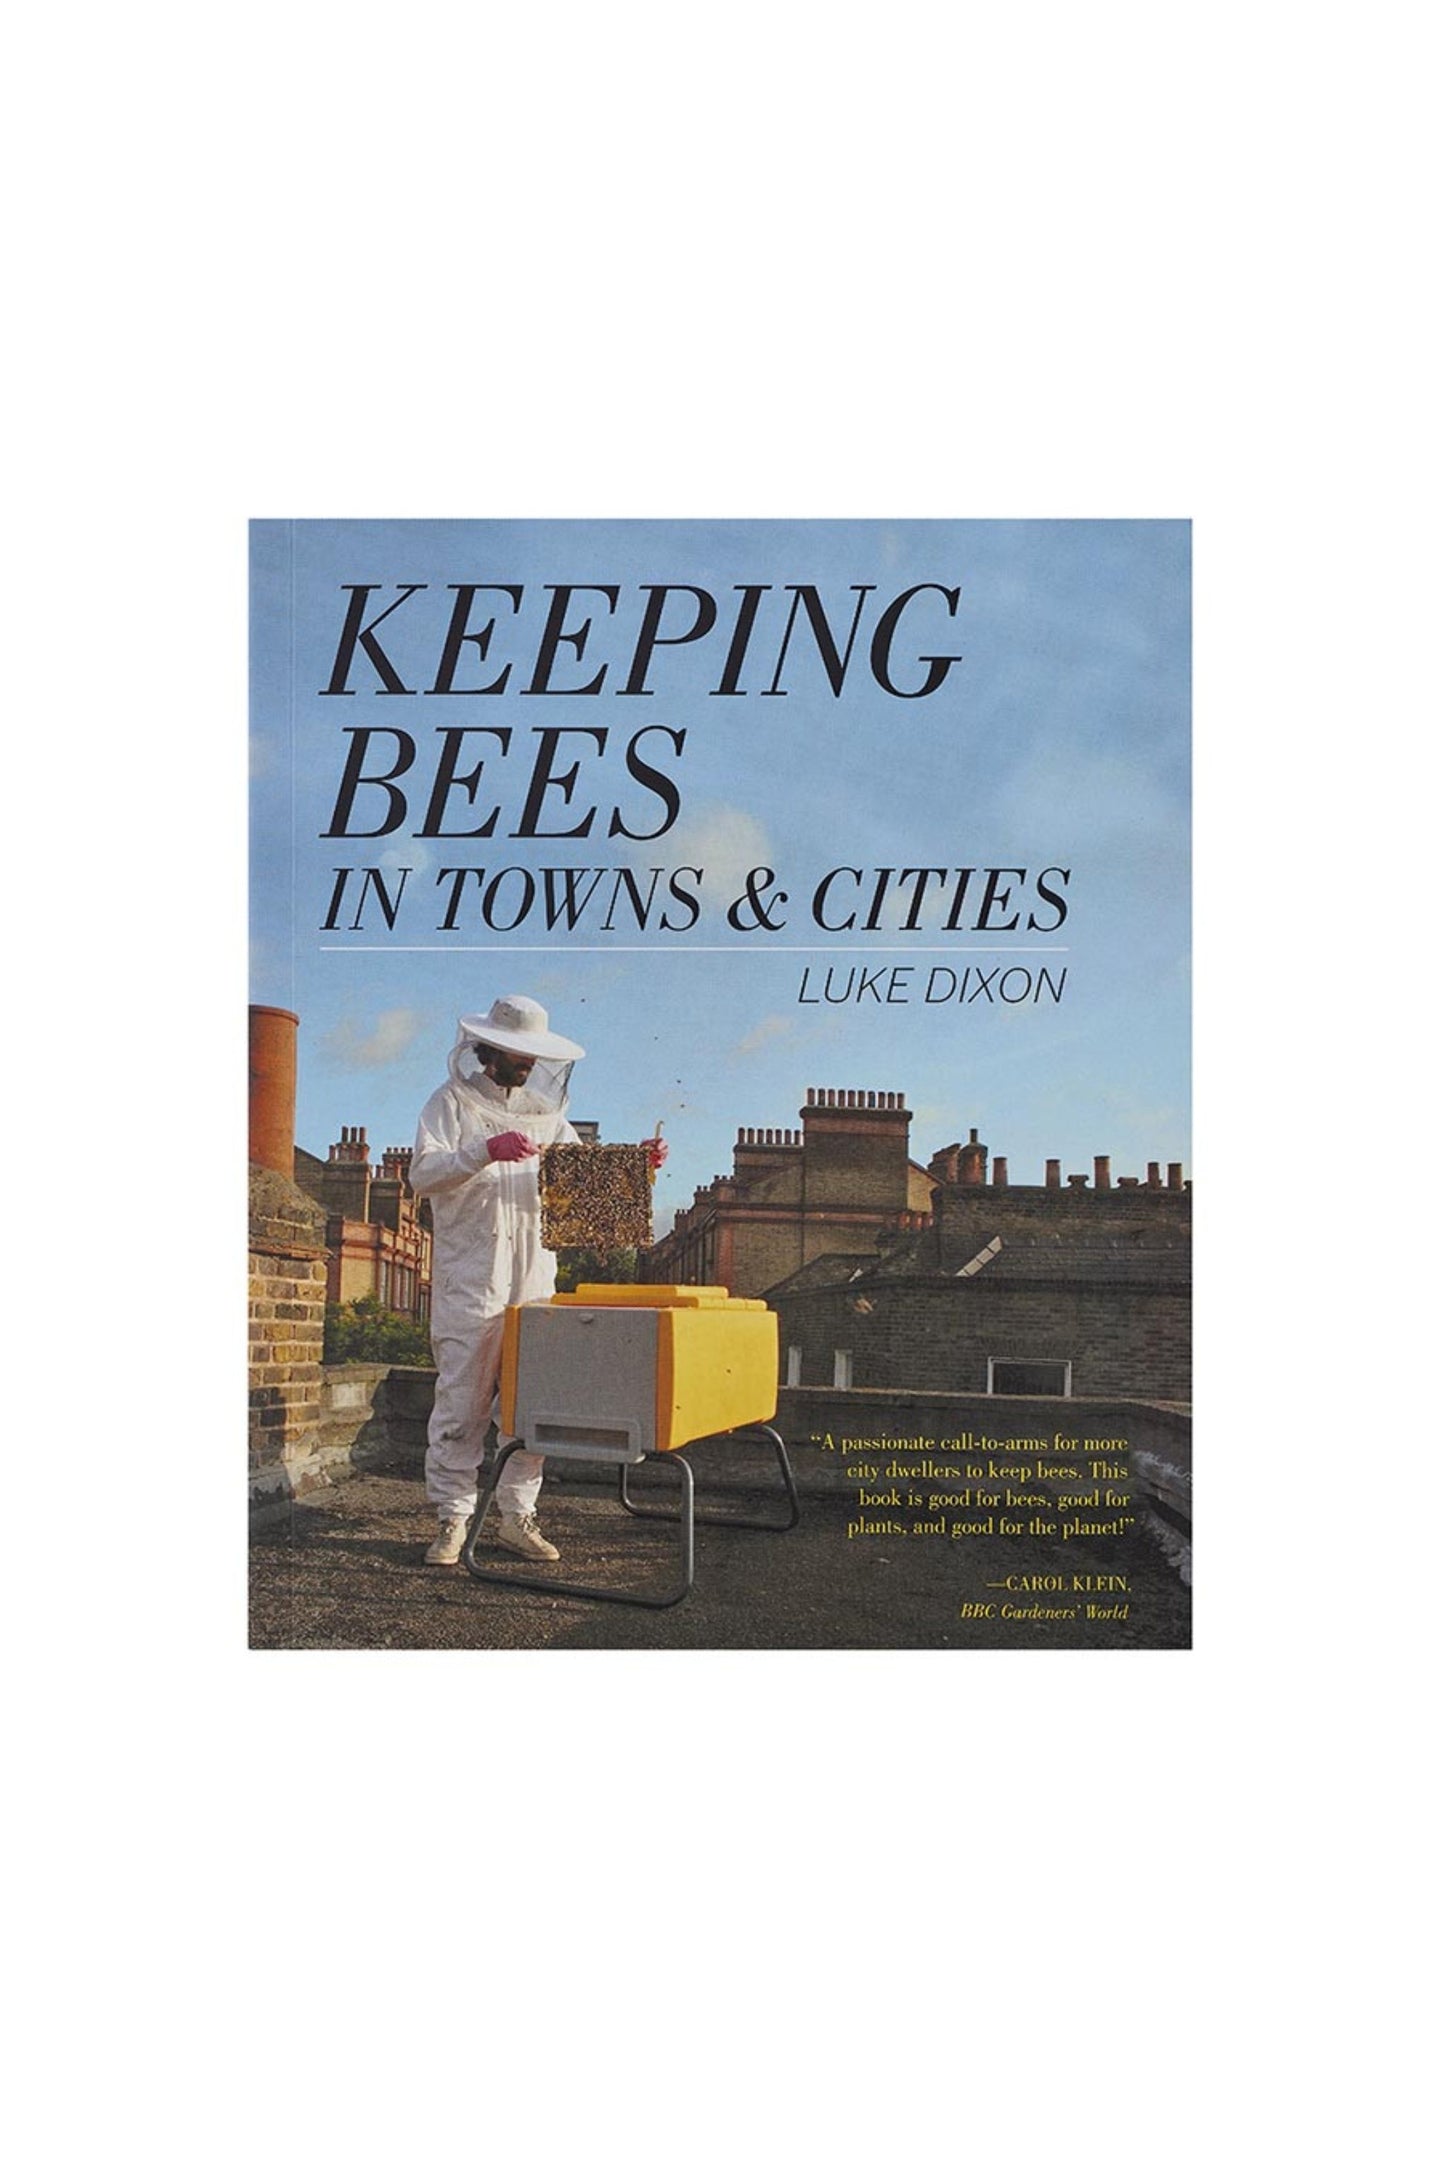 Book:  Keeping Bees in Towns & Cities